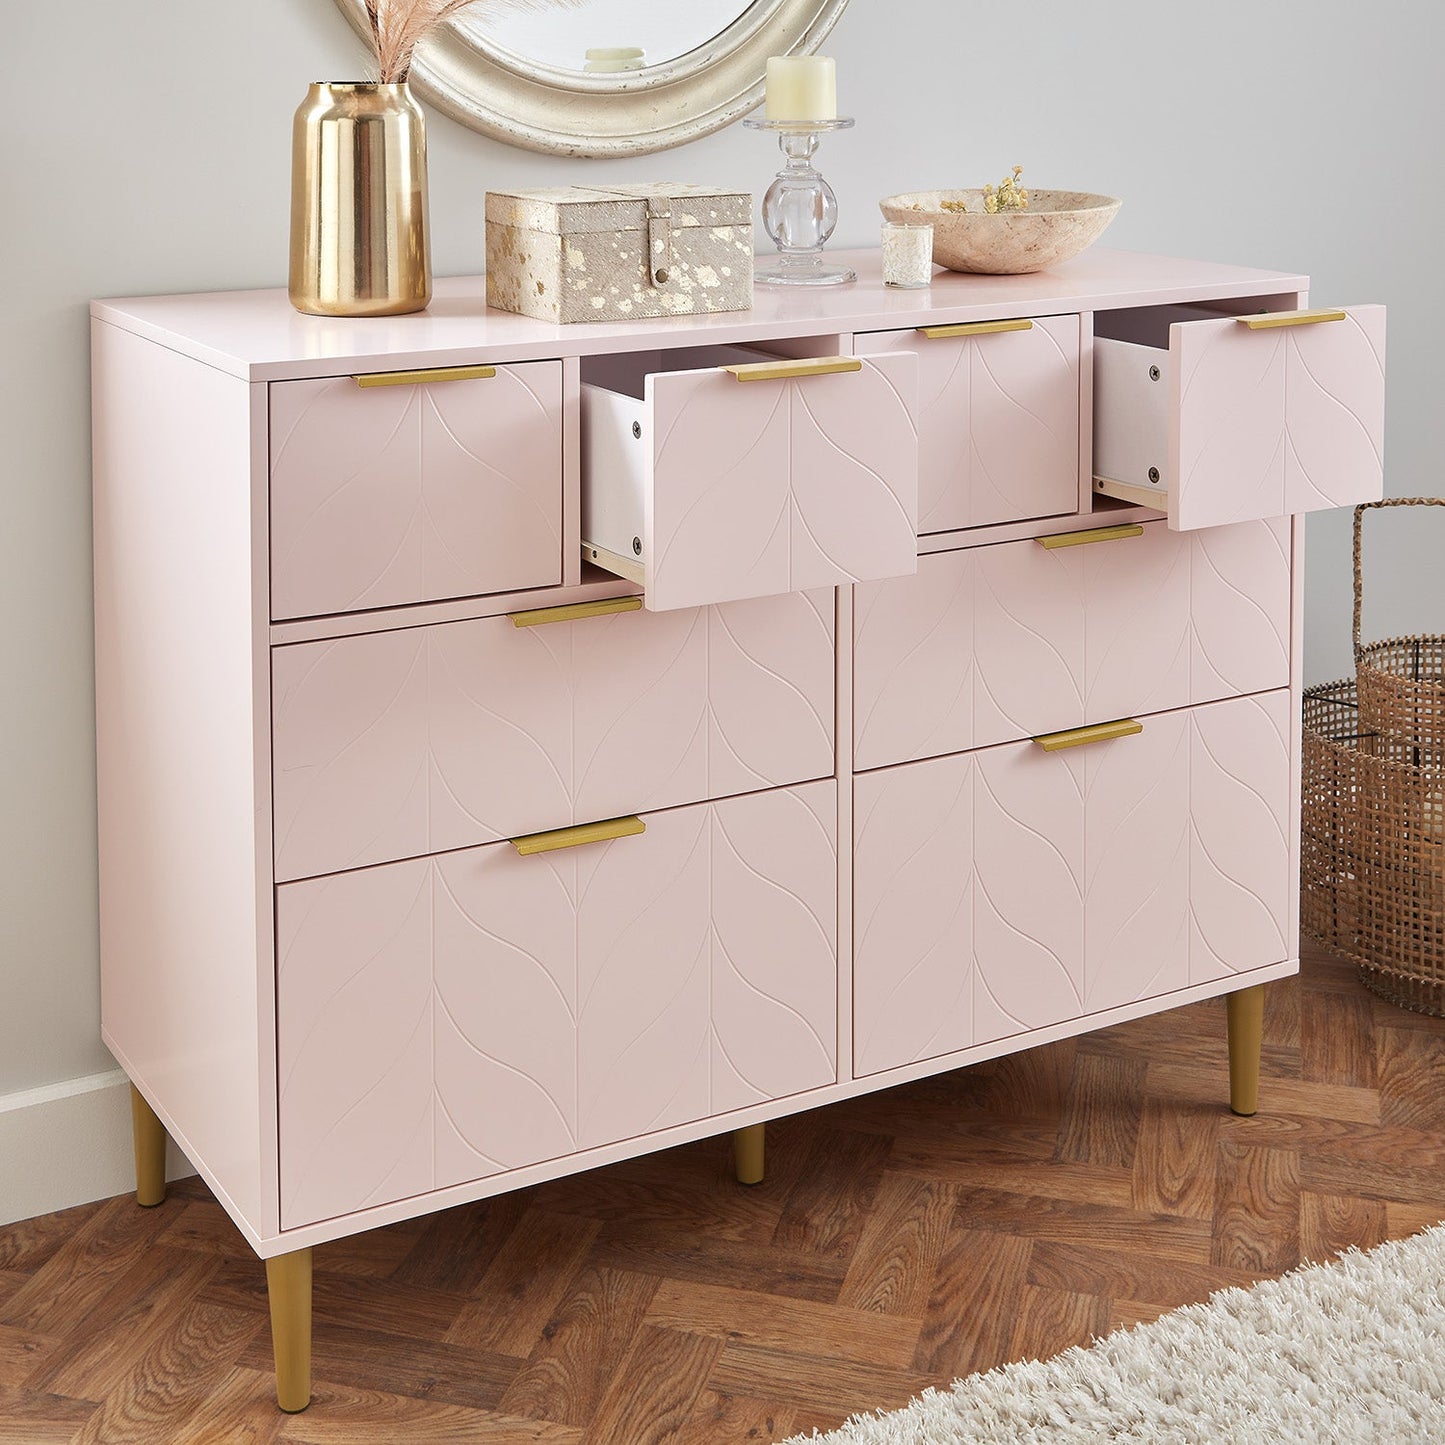 Gloria 3 piece bedroom furniture set - 4 over 4 chest of drawers - pale pink - Laura James